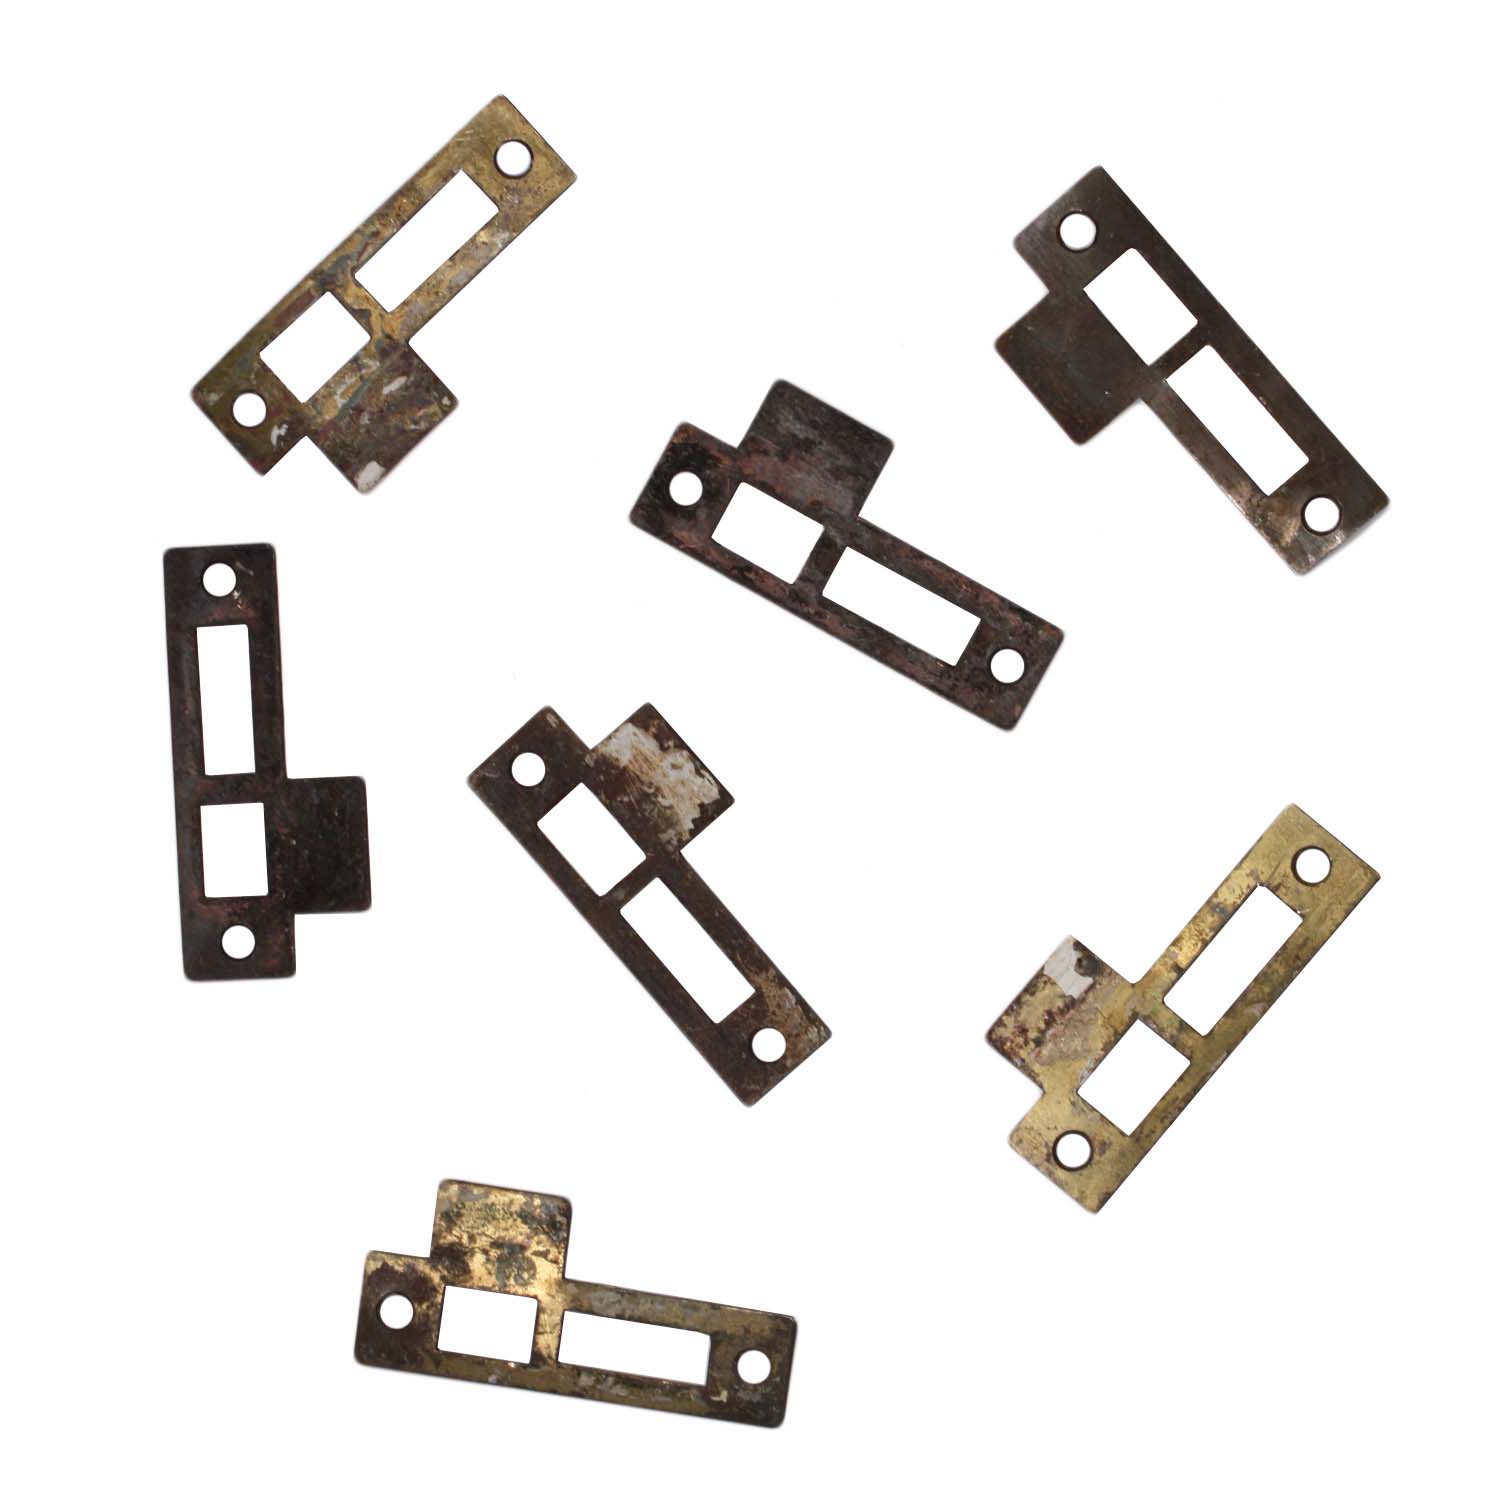 SOLD Antique Salvaged Strike Plates for Mortise Locks, 7/32” Spacing-41459